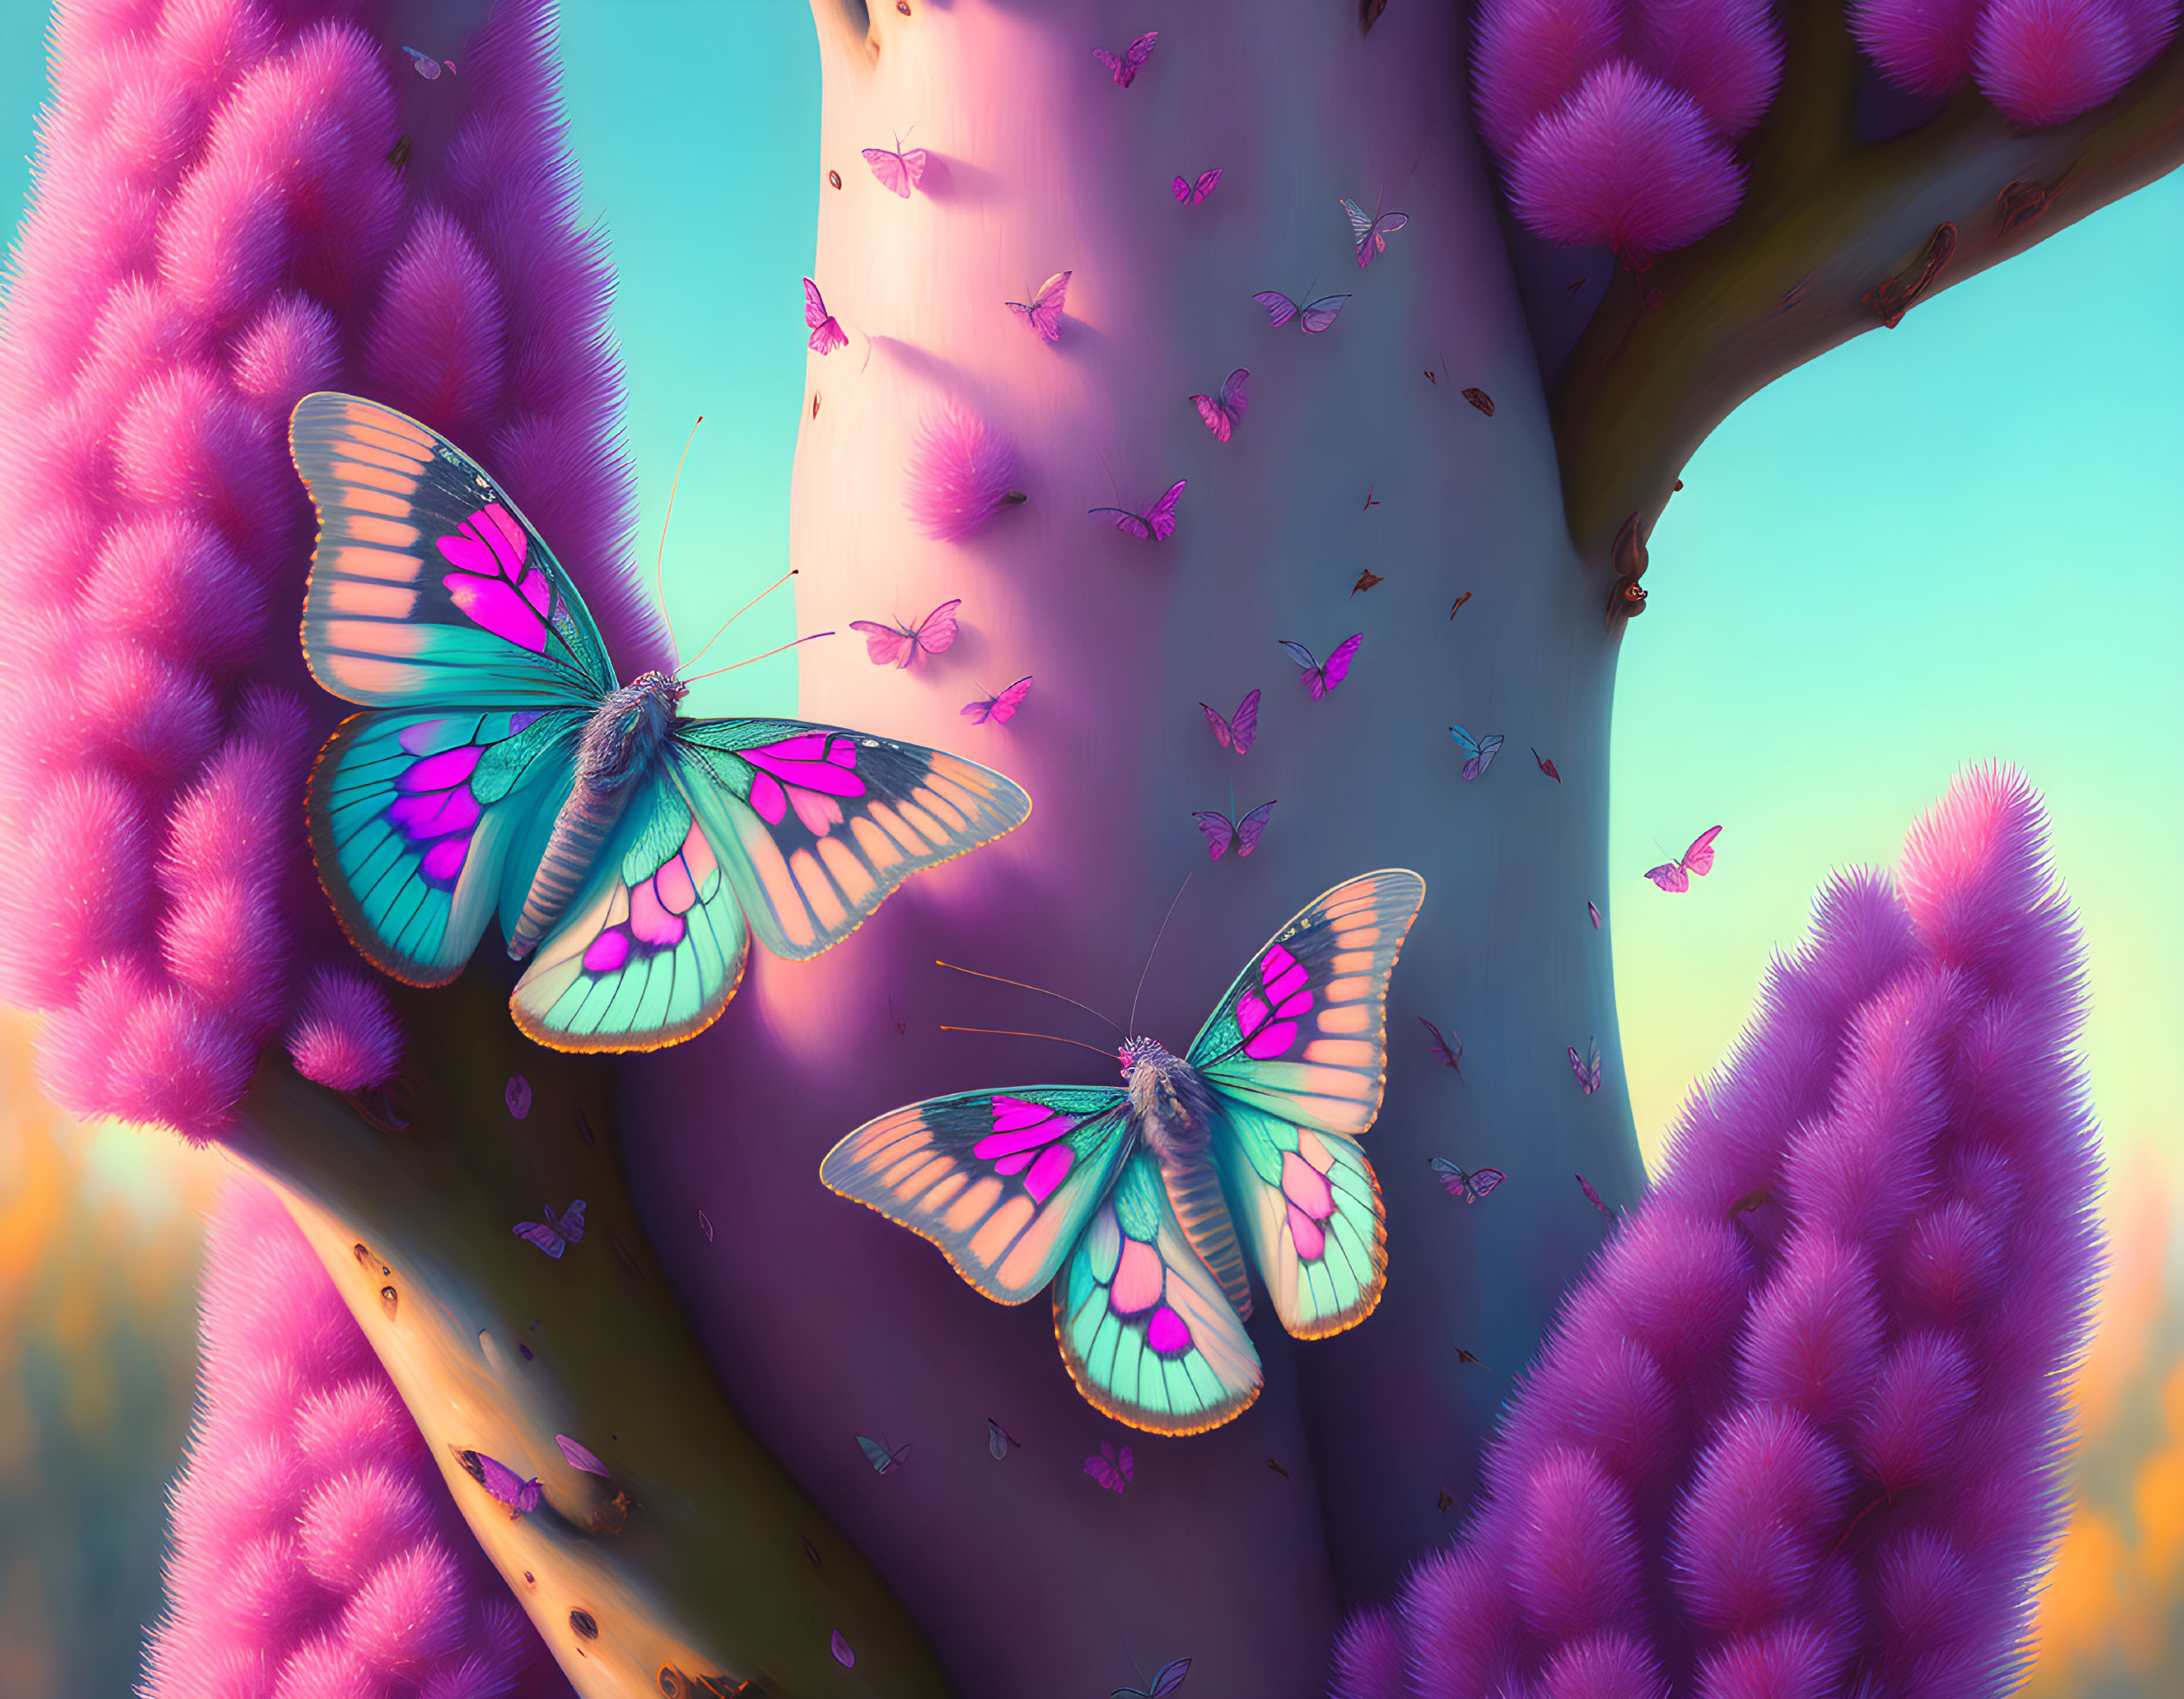 Colorful butterflies on purple cactus with soft-focus background